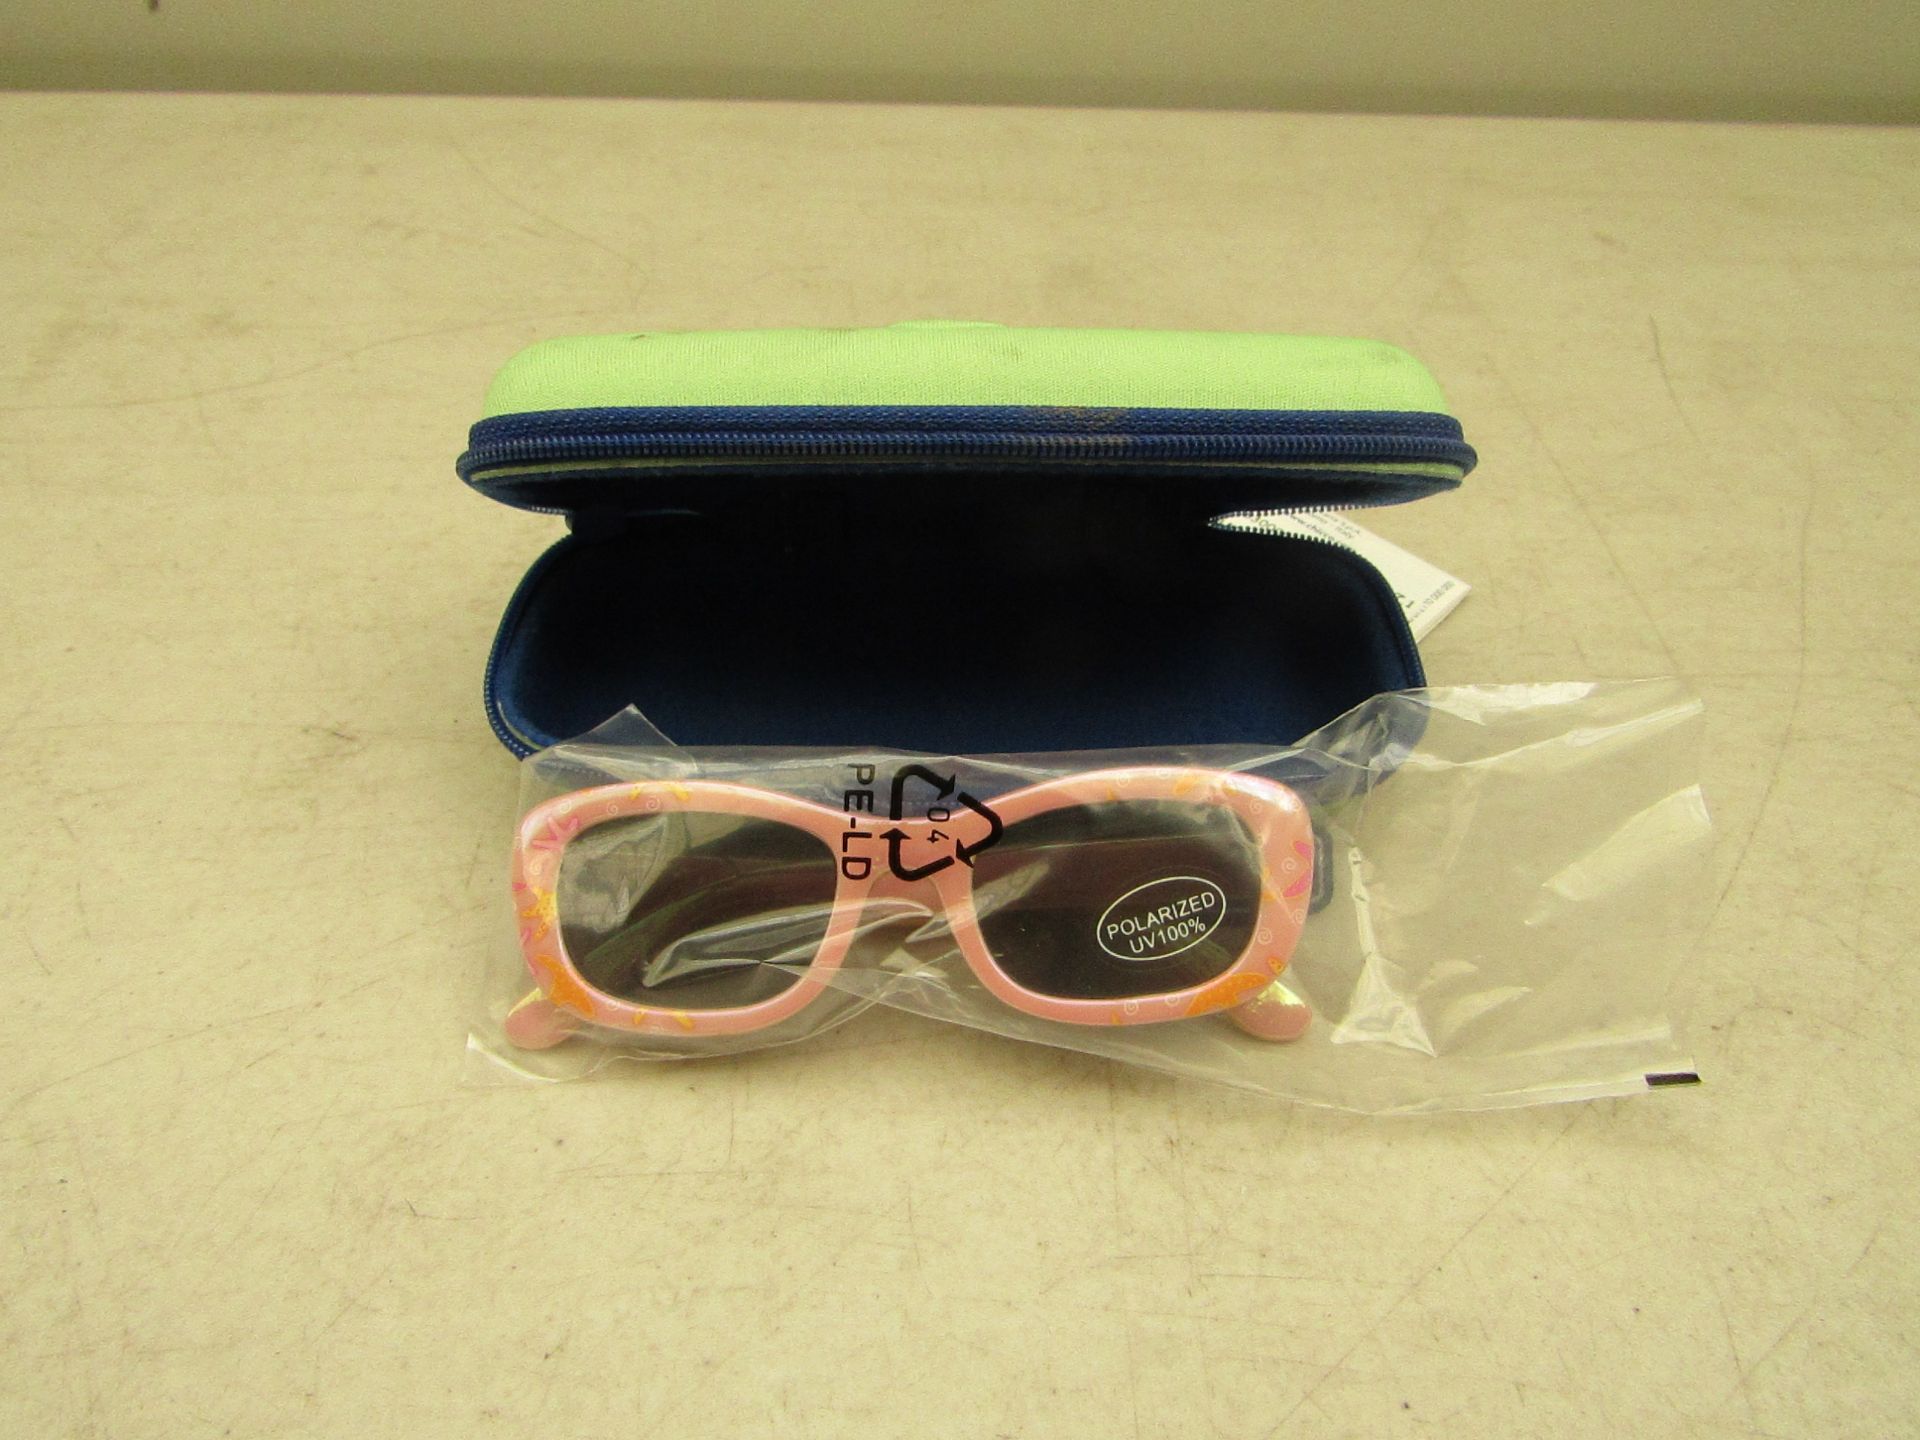 2x Chicco polarized UV 100% sunglasses, 24 months, both new in carry cases.